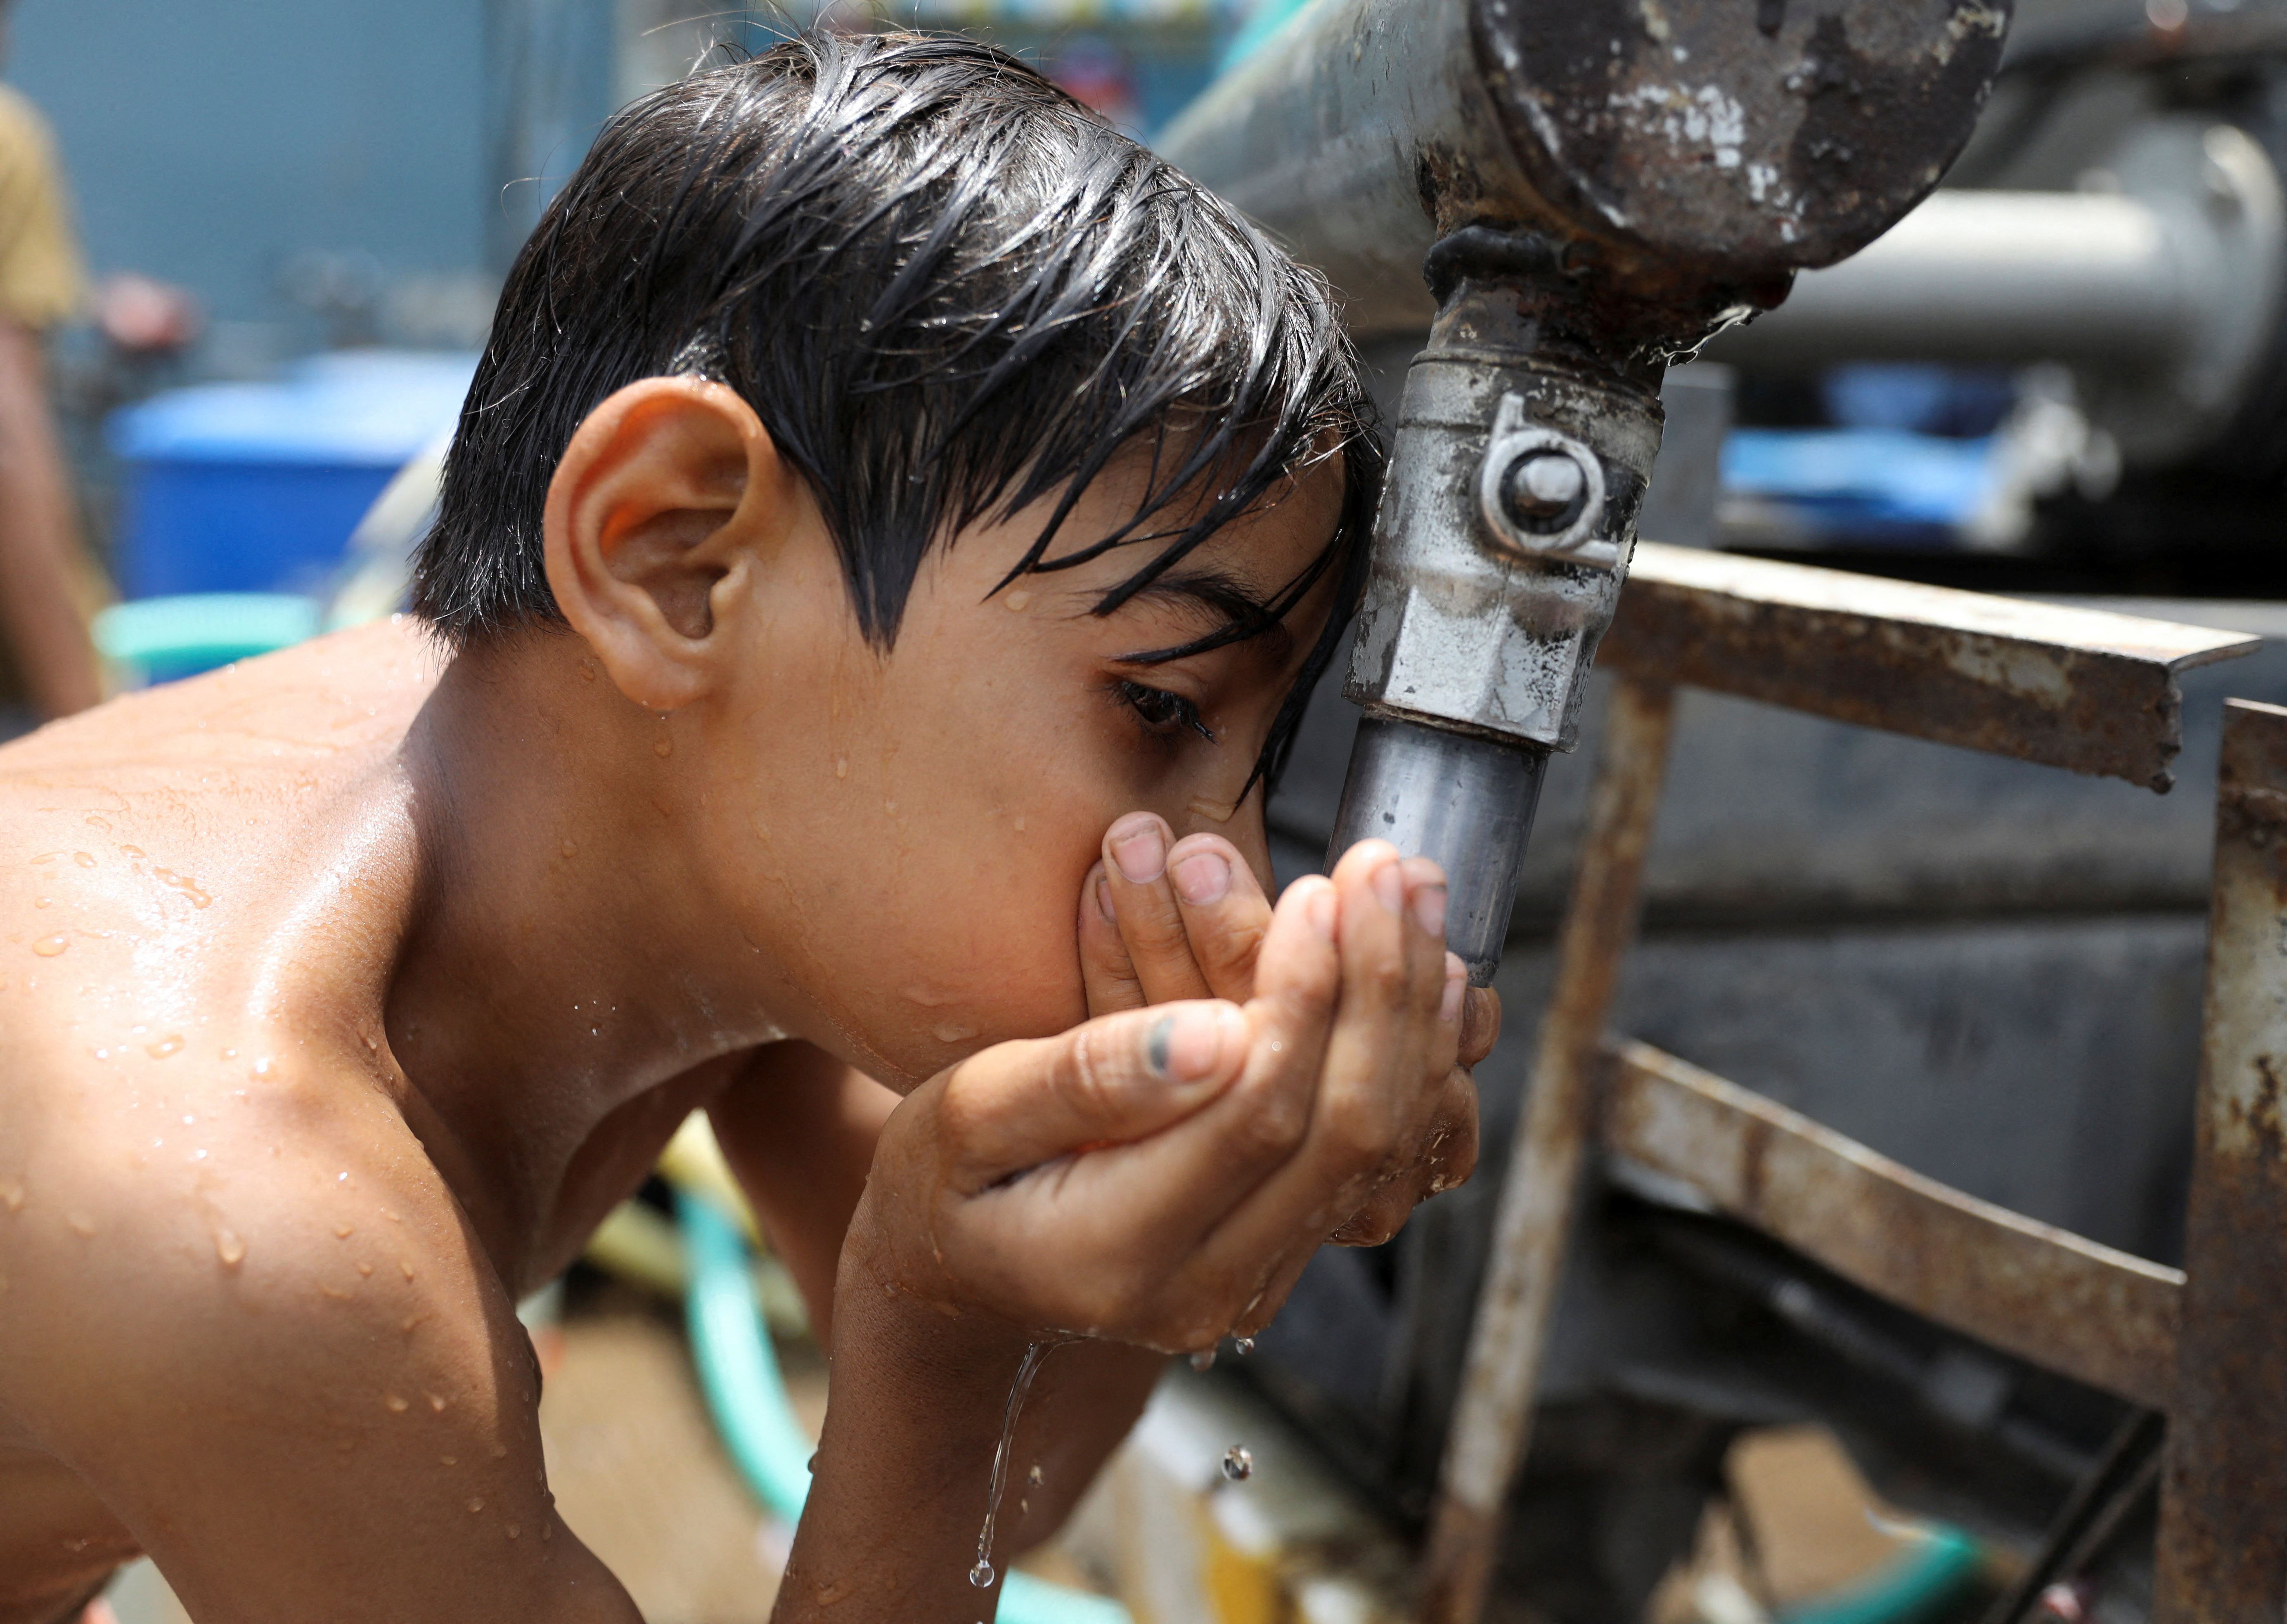 Boy drinks water from a municipal tanker on a hot summer day in New Delhi